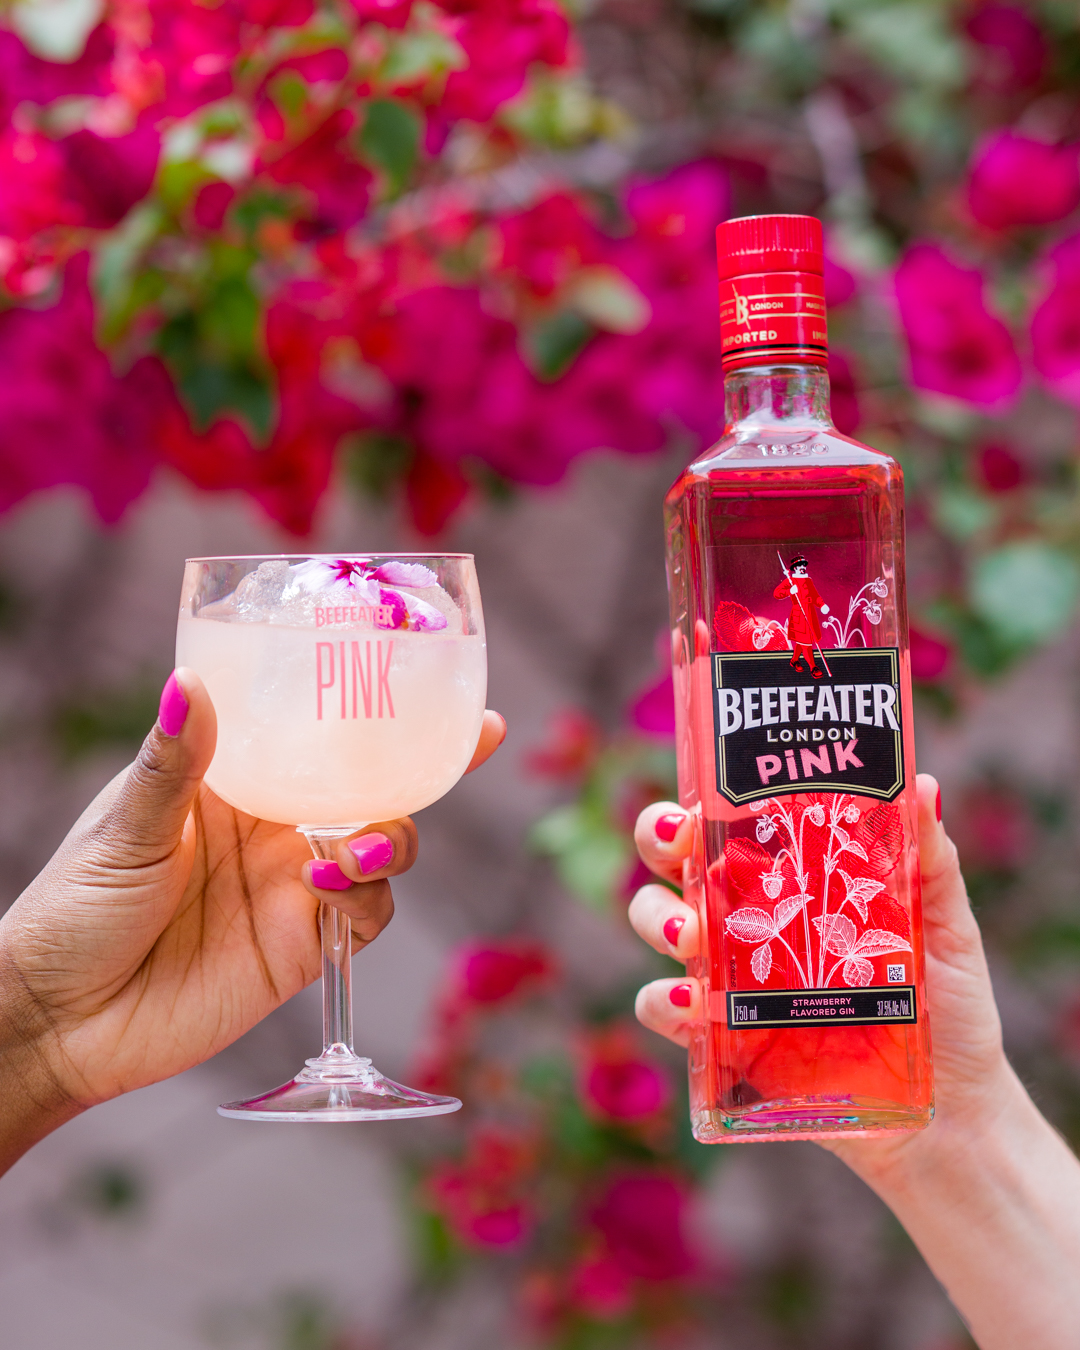 Beefeater Gin US to the weekend. What Beefeater Pink cocktail will you be enjoying? #BeefeaterPink #PinkYourGin